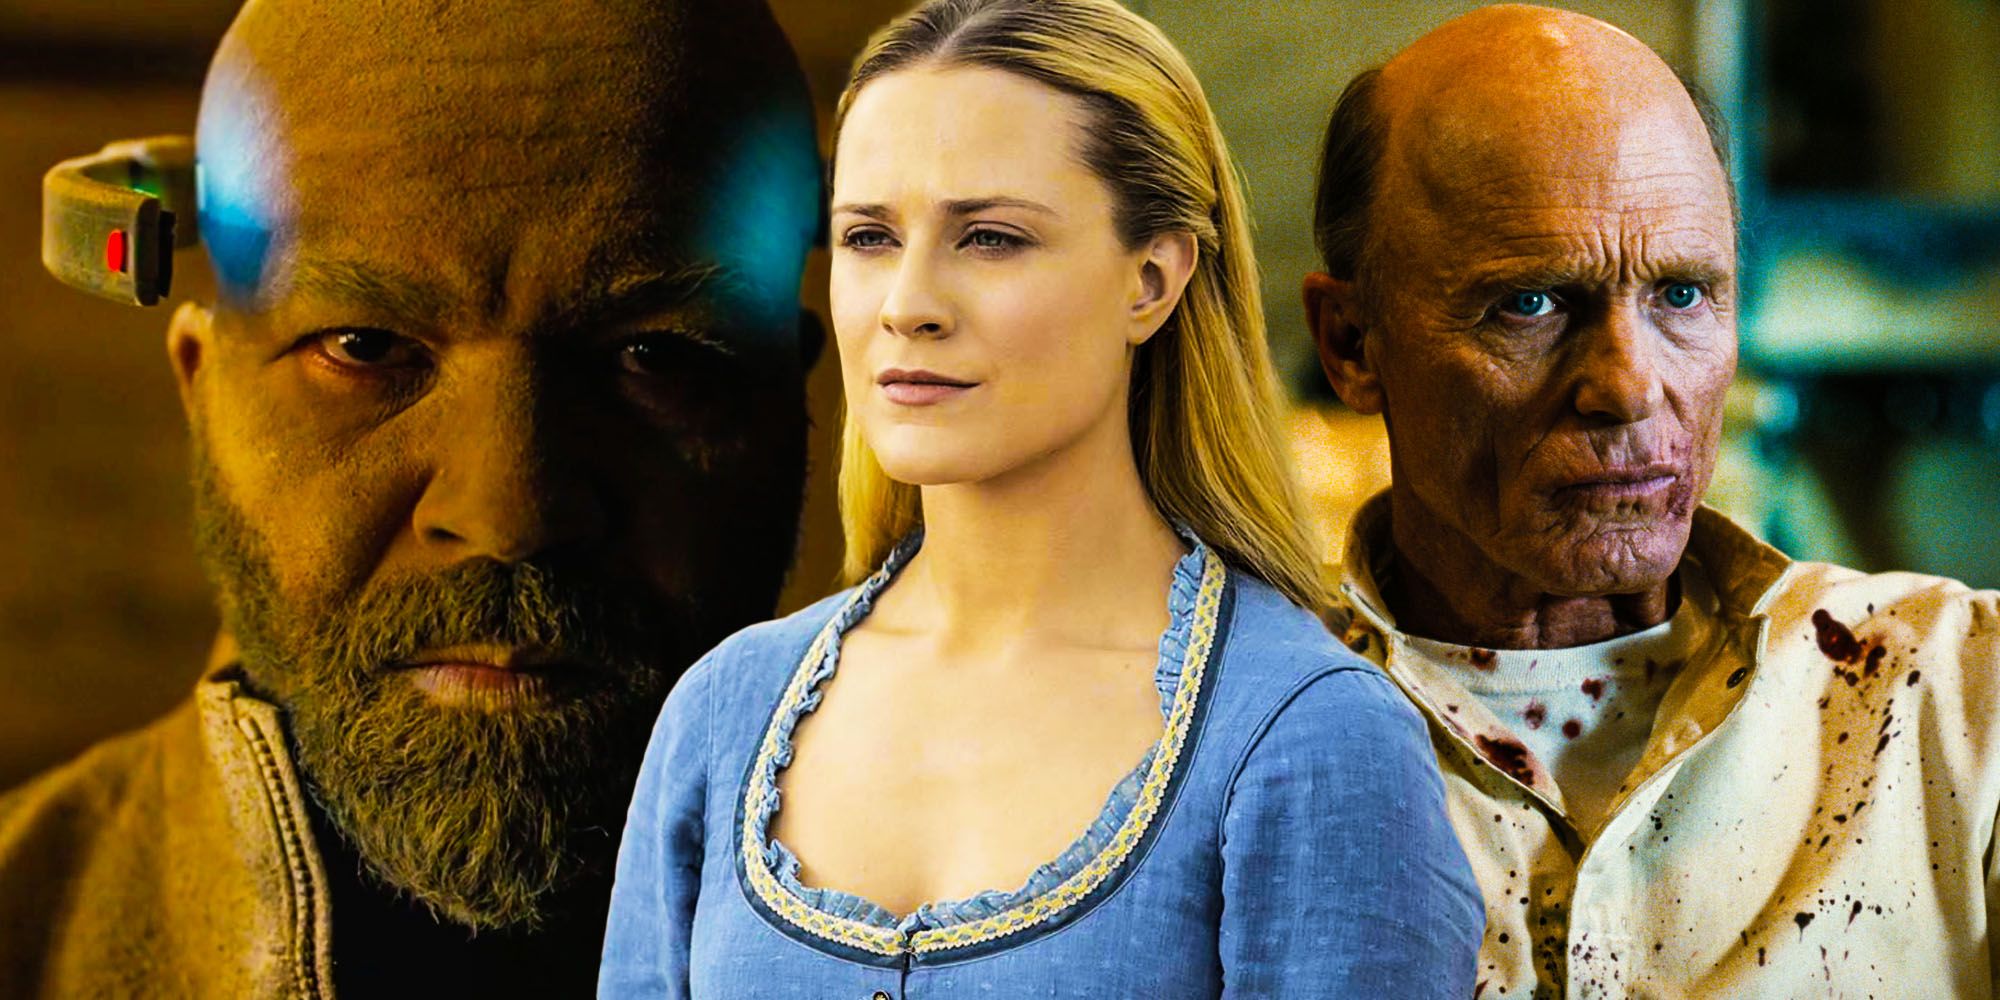 Westworld season 4 biggest questions and mysteries